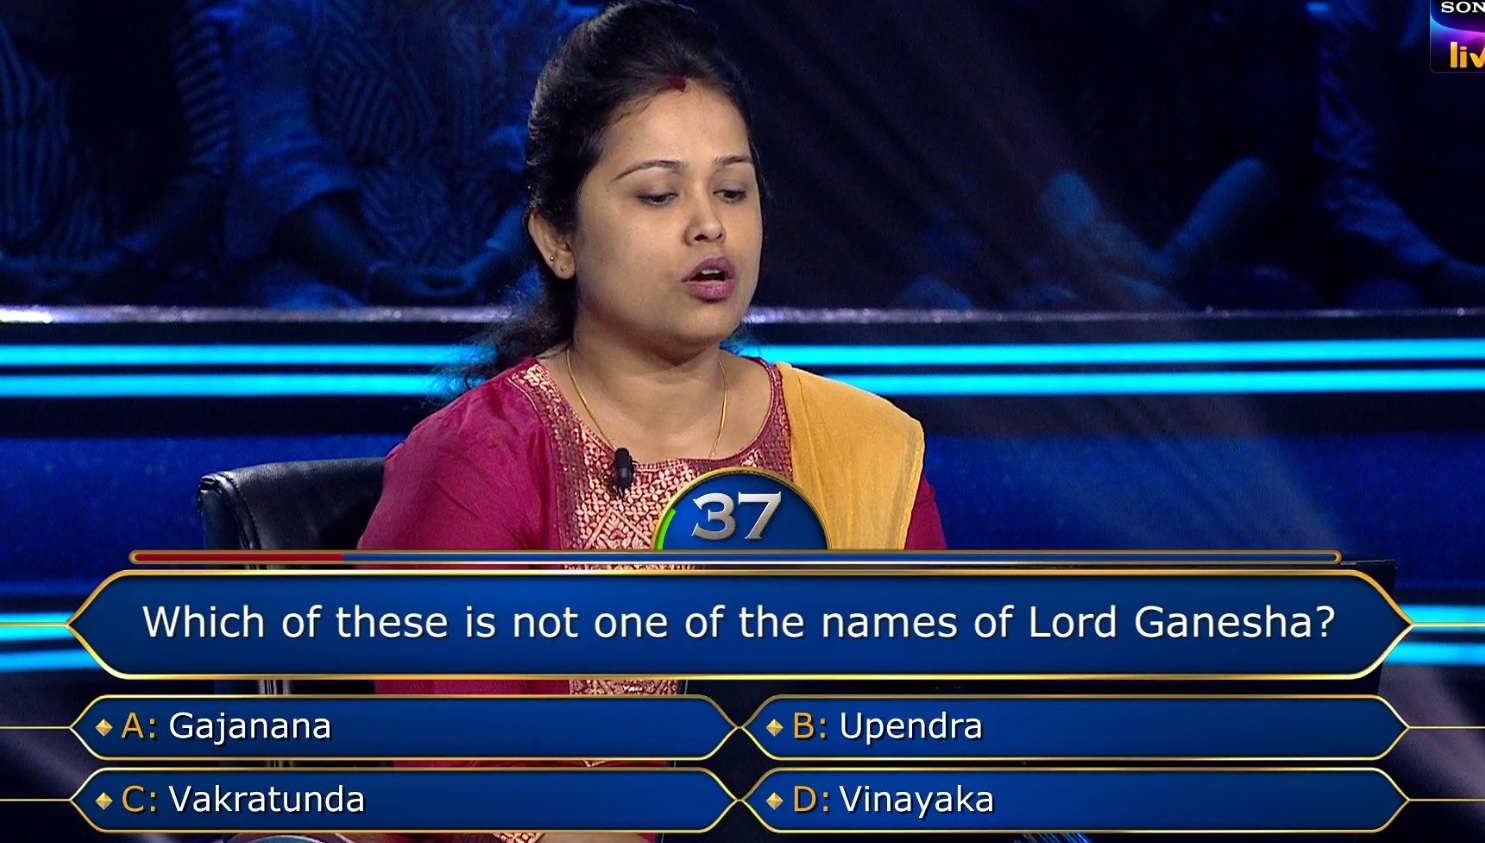 Ques : Which of these is not one of the names of Lord Ganesha?